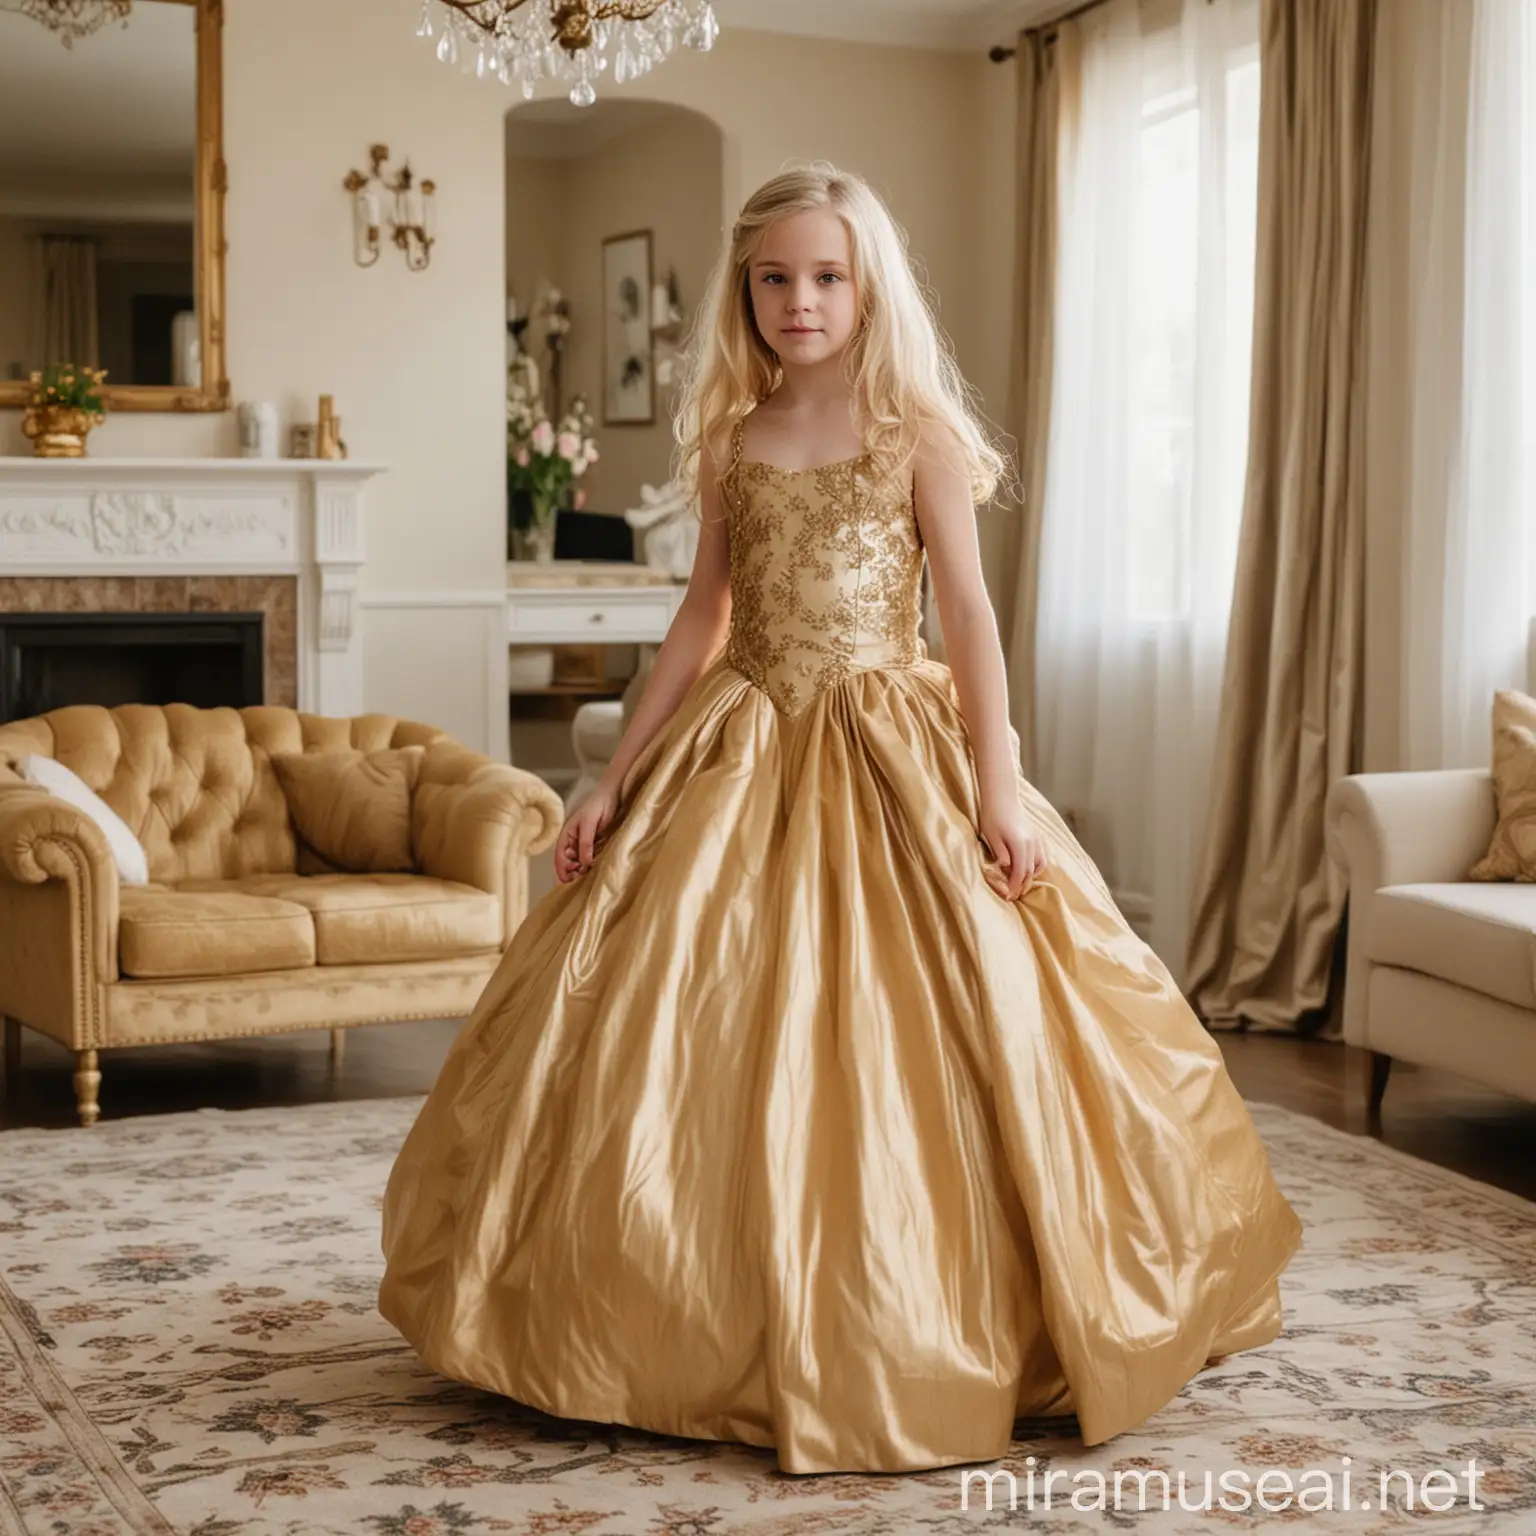 10 year old blonde girl in golden ball grown standing in living room